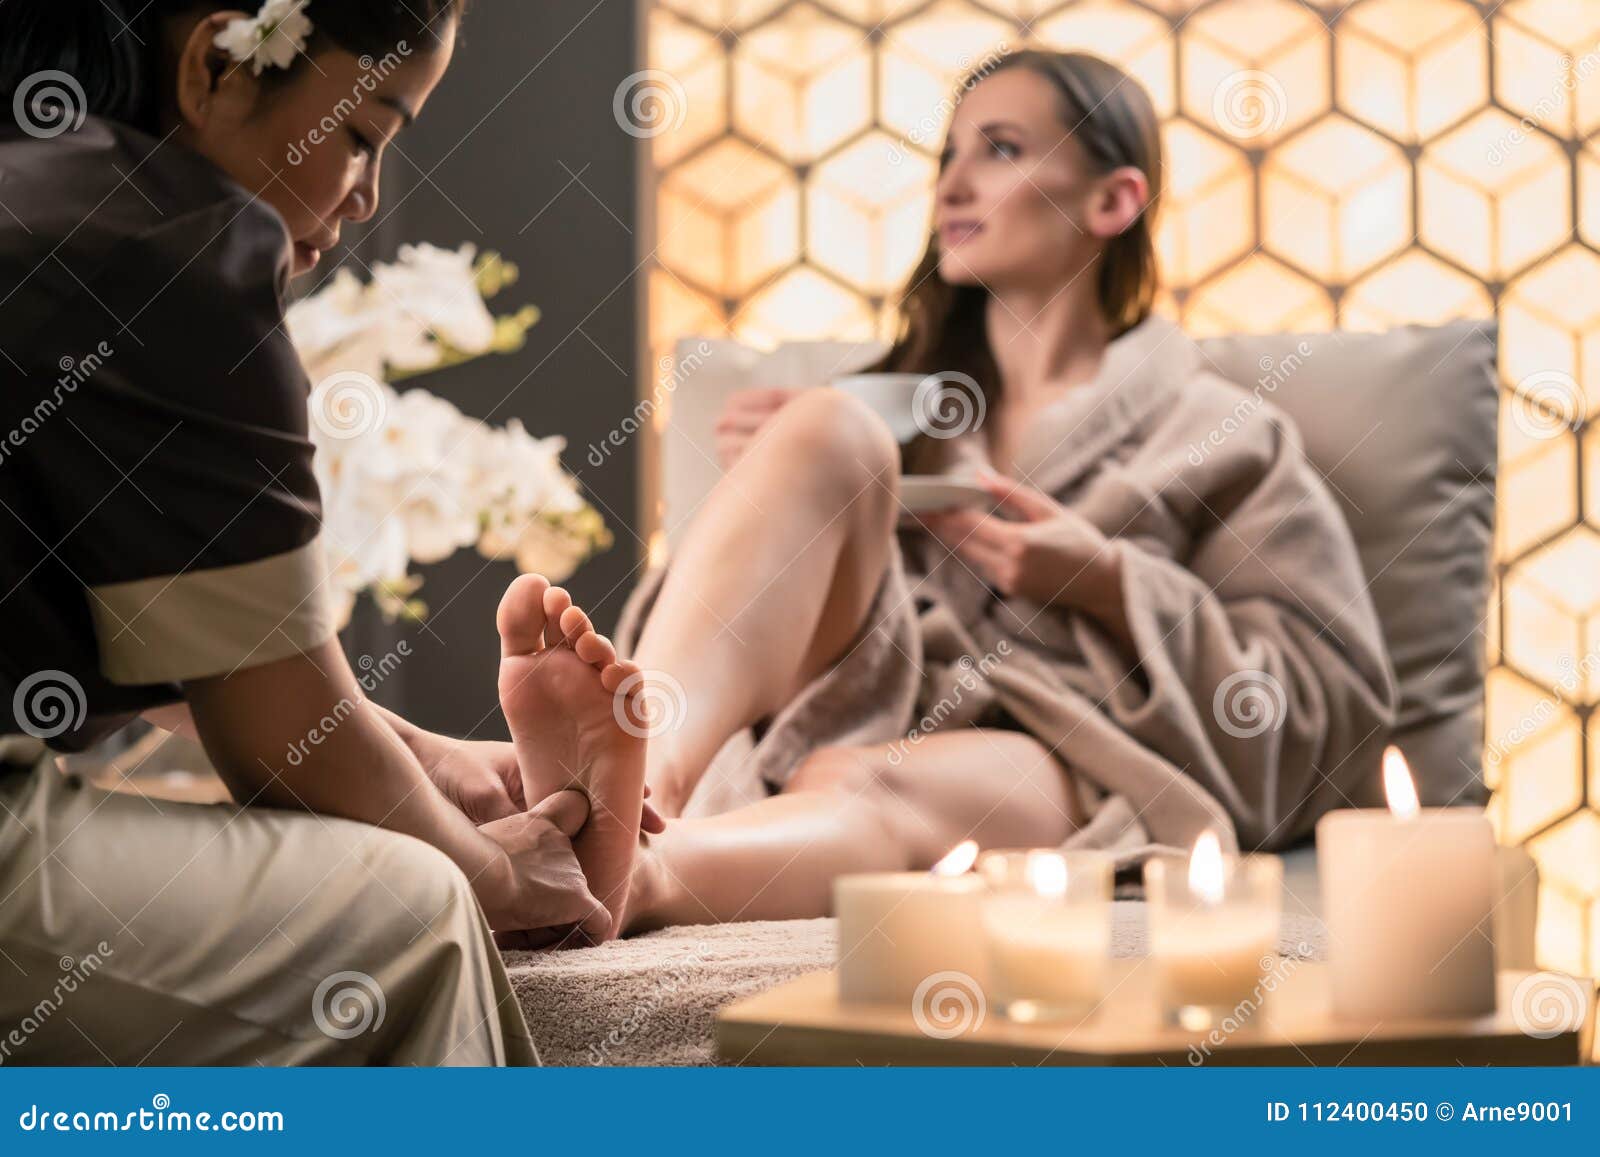 Therapist Massaging The Foot Of A Female Client In Asian Beauty Stock